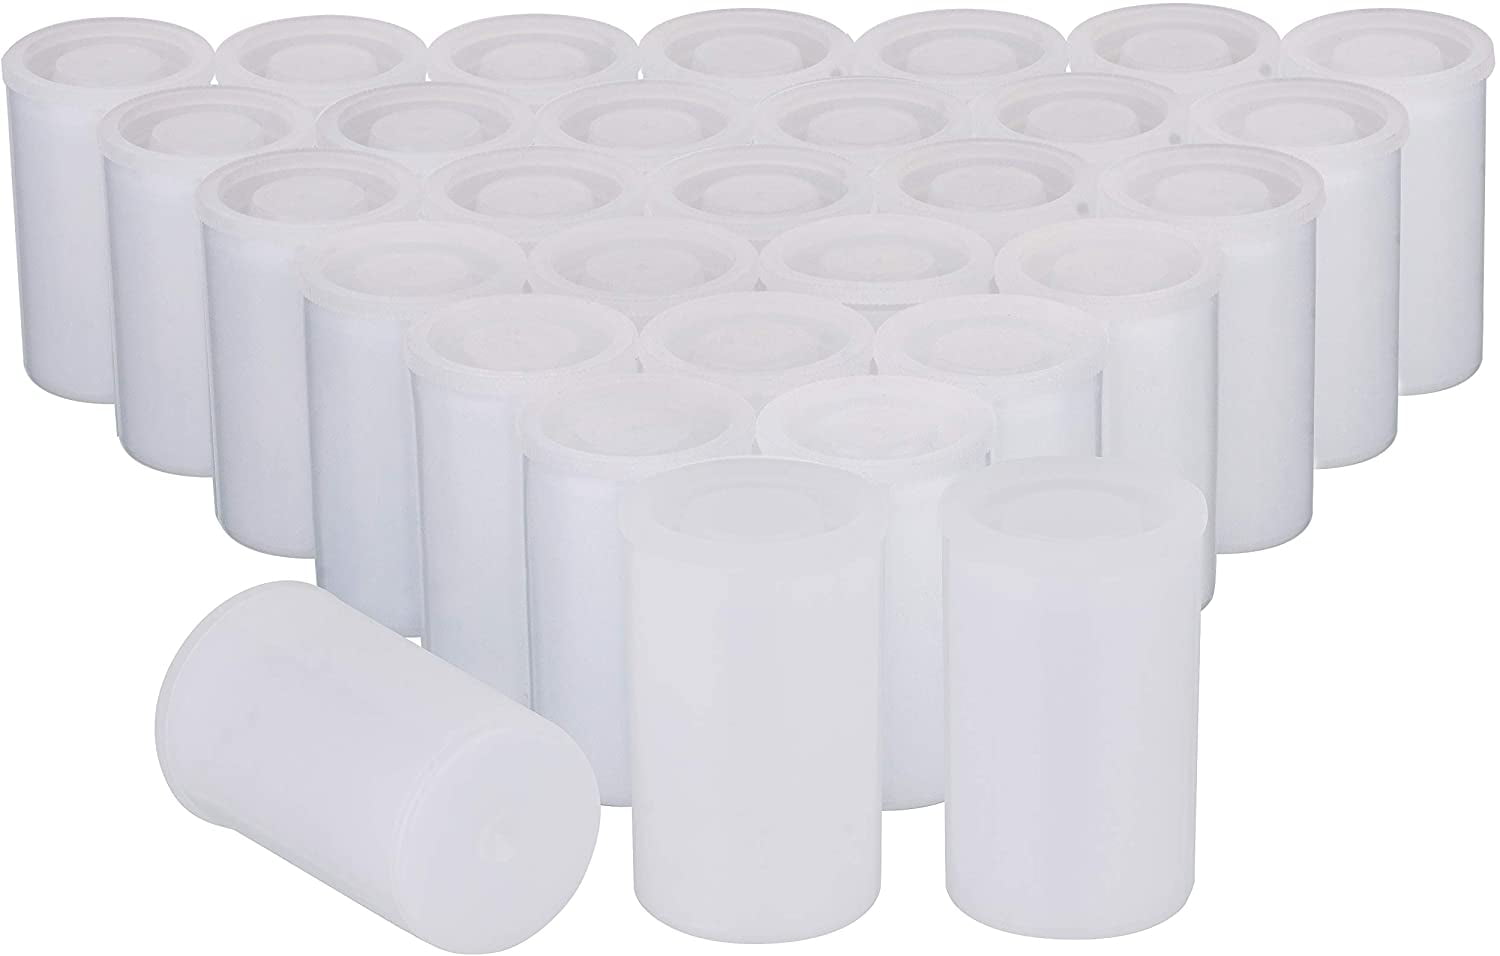 30 PCS Film Canister with Caps for 35mm Film Black 